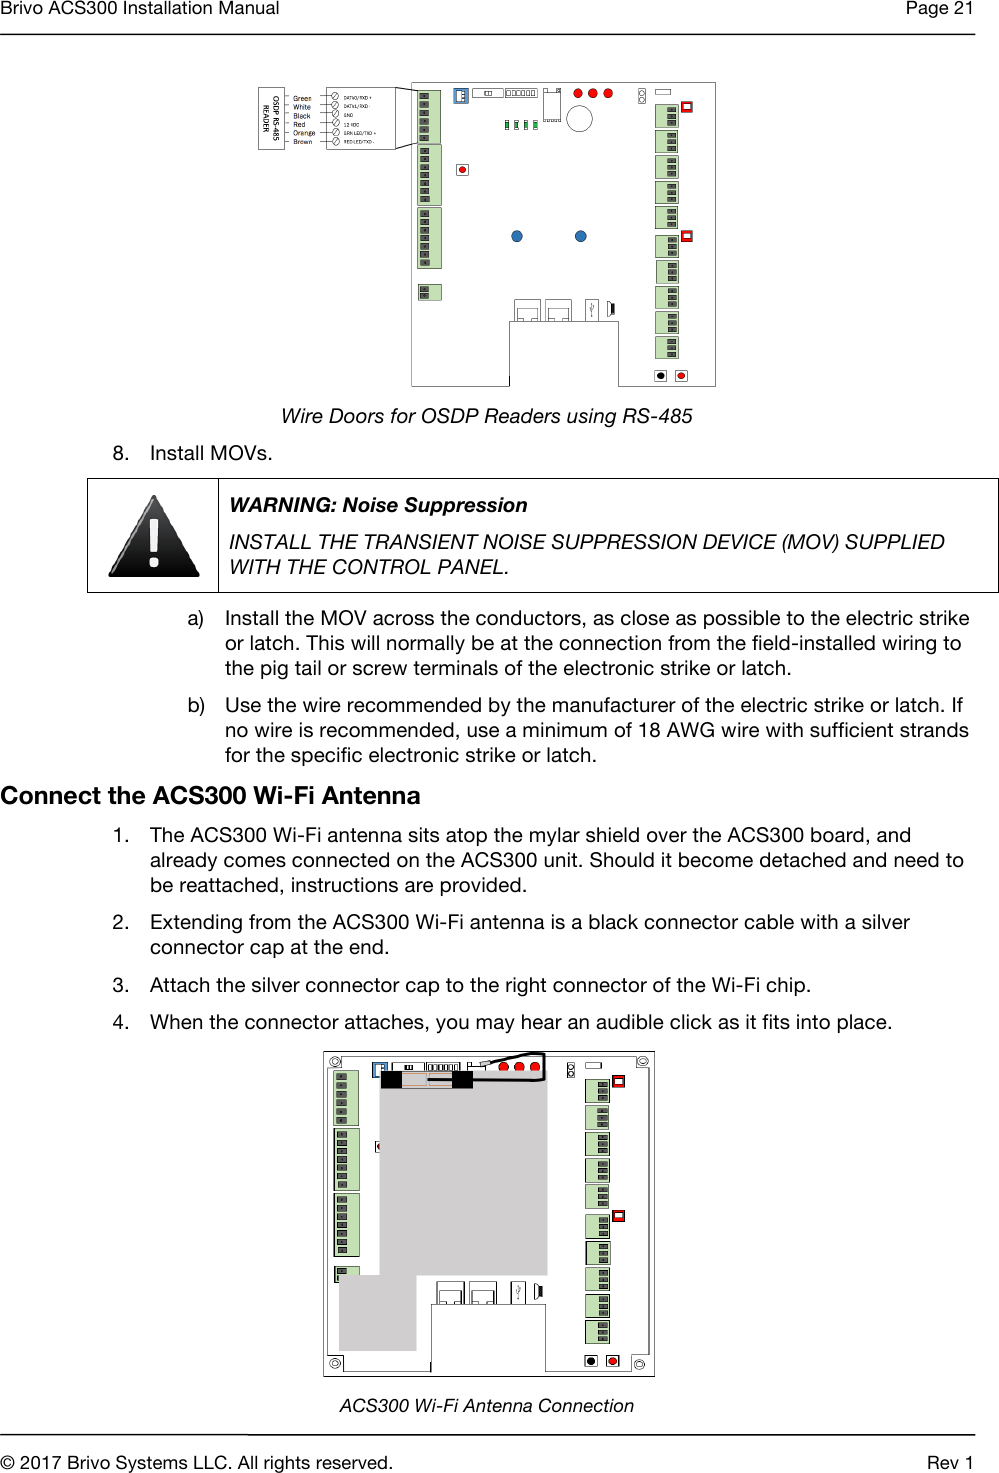 Brivo ACS300 Installation Manual Page 21     © 2017 Brivo Systems LLC. All rights reserved. Rev 1   Wire Doors for OSDP Readers using RS-485 8. Install MOVs.  WARNING: Noise Suppression INSTALL THE TRANSIENT NOISE SUPPRESSION DEVICE (MOV) SUPPLIED WITH THE CONTROL PANEL. a) Install the MOV across the conductors, as close as possible to the electric strike or latch. This will normally be at the connection from the field-installed wiring to the pig tail or screw terminals of the electronic strike or latch. b) Use the wire recommended by the manufacturer of the electric strike or latch. If no wire is recommended, use a minimum of 18 AWG wire with sufficient strands for the specific electronic strike or latch. Connect the ACS300 Wi-Fi Antenna 1. The ACS300 Wi-Fi antenna sits atop the mylar shield over the ACS300 board, and already comes connected on the ACS300 unit. Should it become detached and need to be reattached, instructions are provided. 2. Extending from the ACS300 Wi-Fi antenna is a black connector cable with a silver connector cap at the end. 3. Attach the silver connector cap to the right connector of the Wi-Fi chip. 4. When the connector attaches, you may hear an audible click as it fits into place.  ACS300 Wi-Fi Antenna Connection 